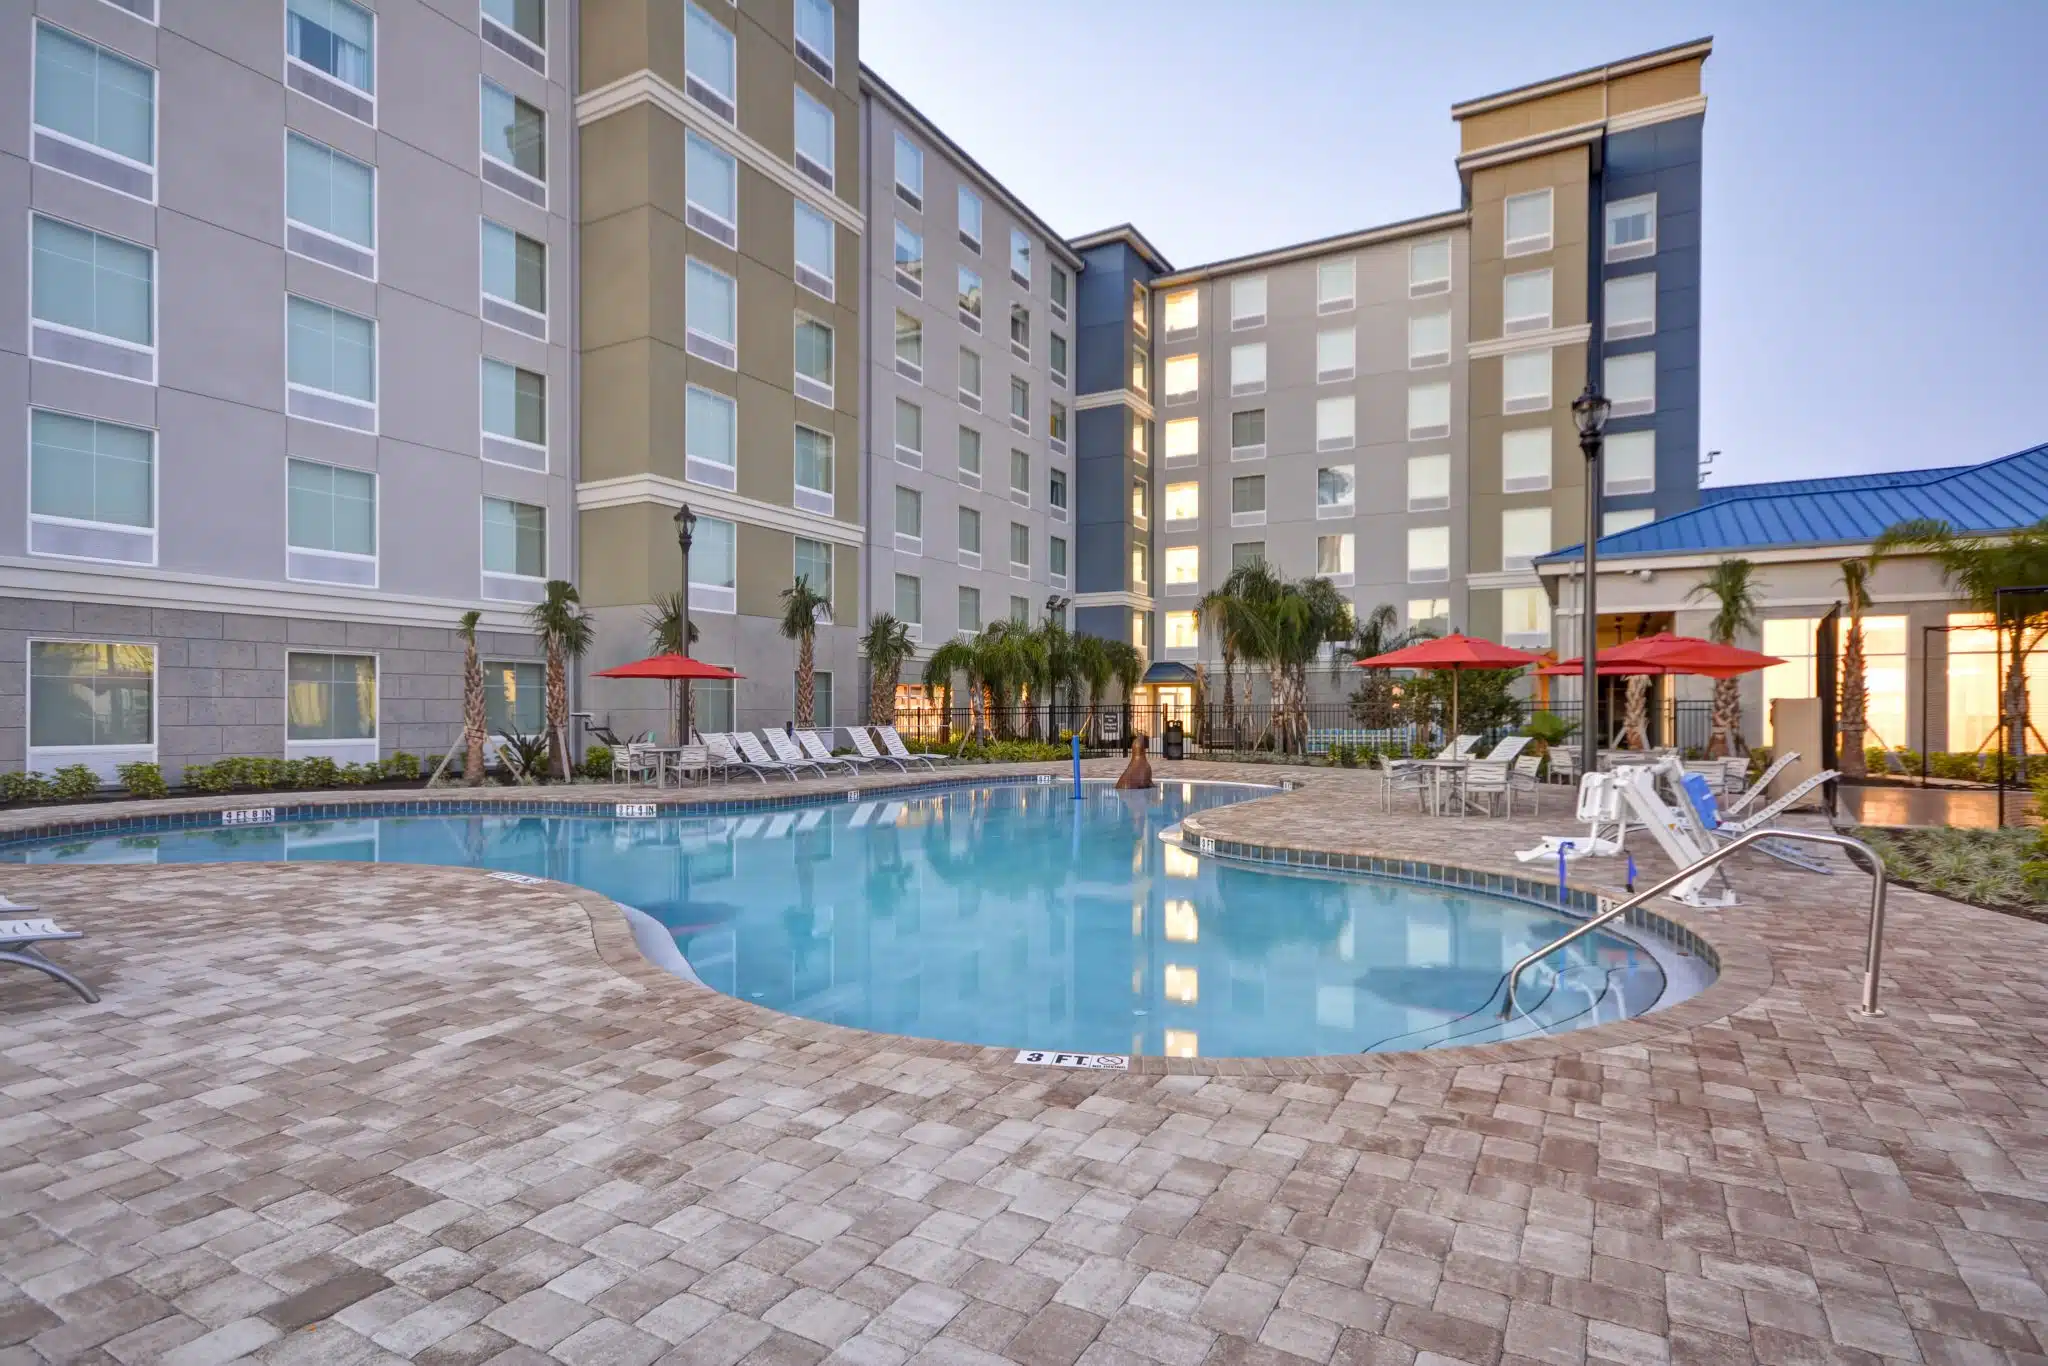 10 Reasons You’ve Got to Stay at the Homewood Suites Orlando!